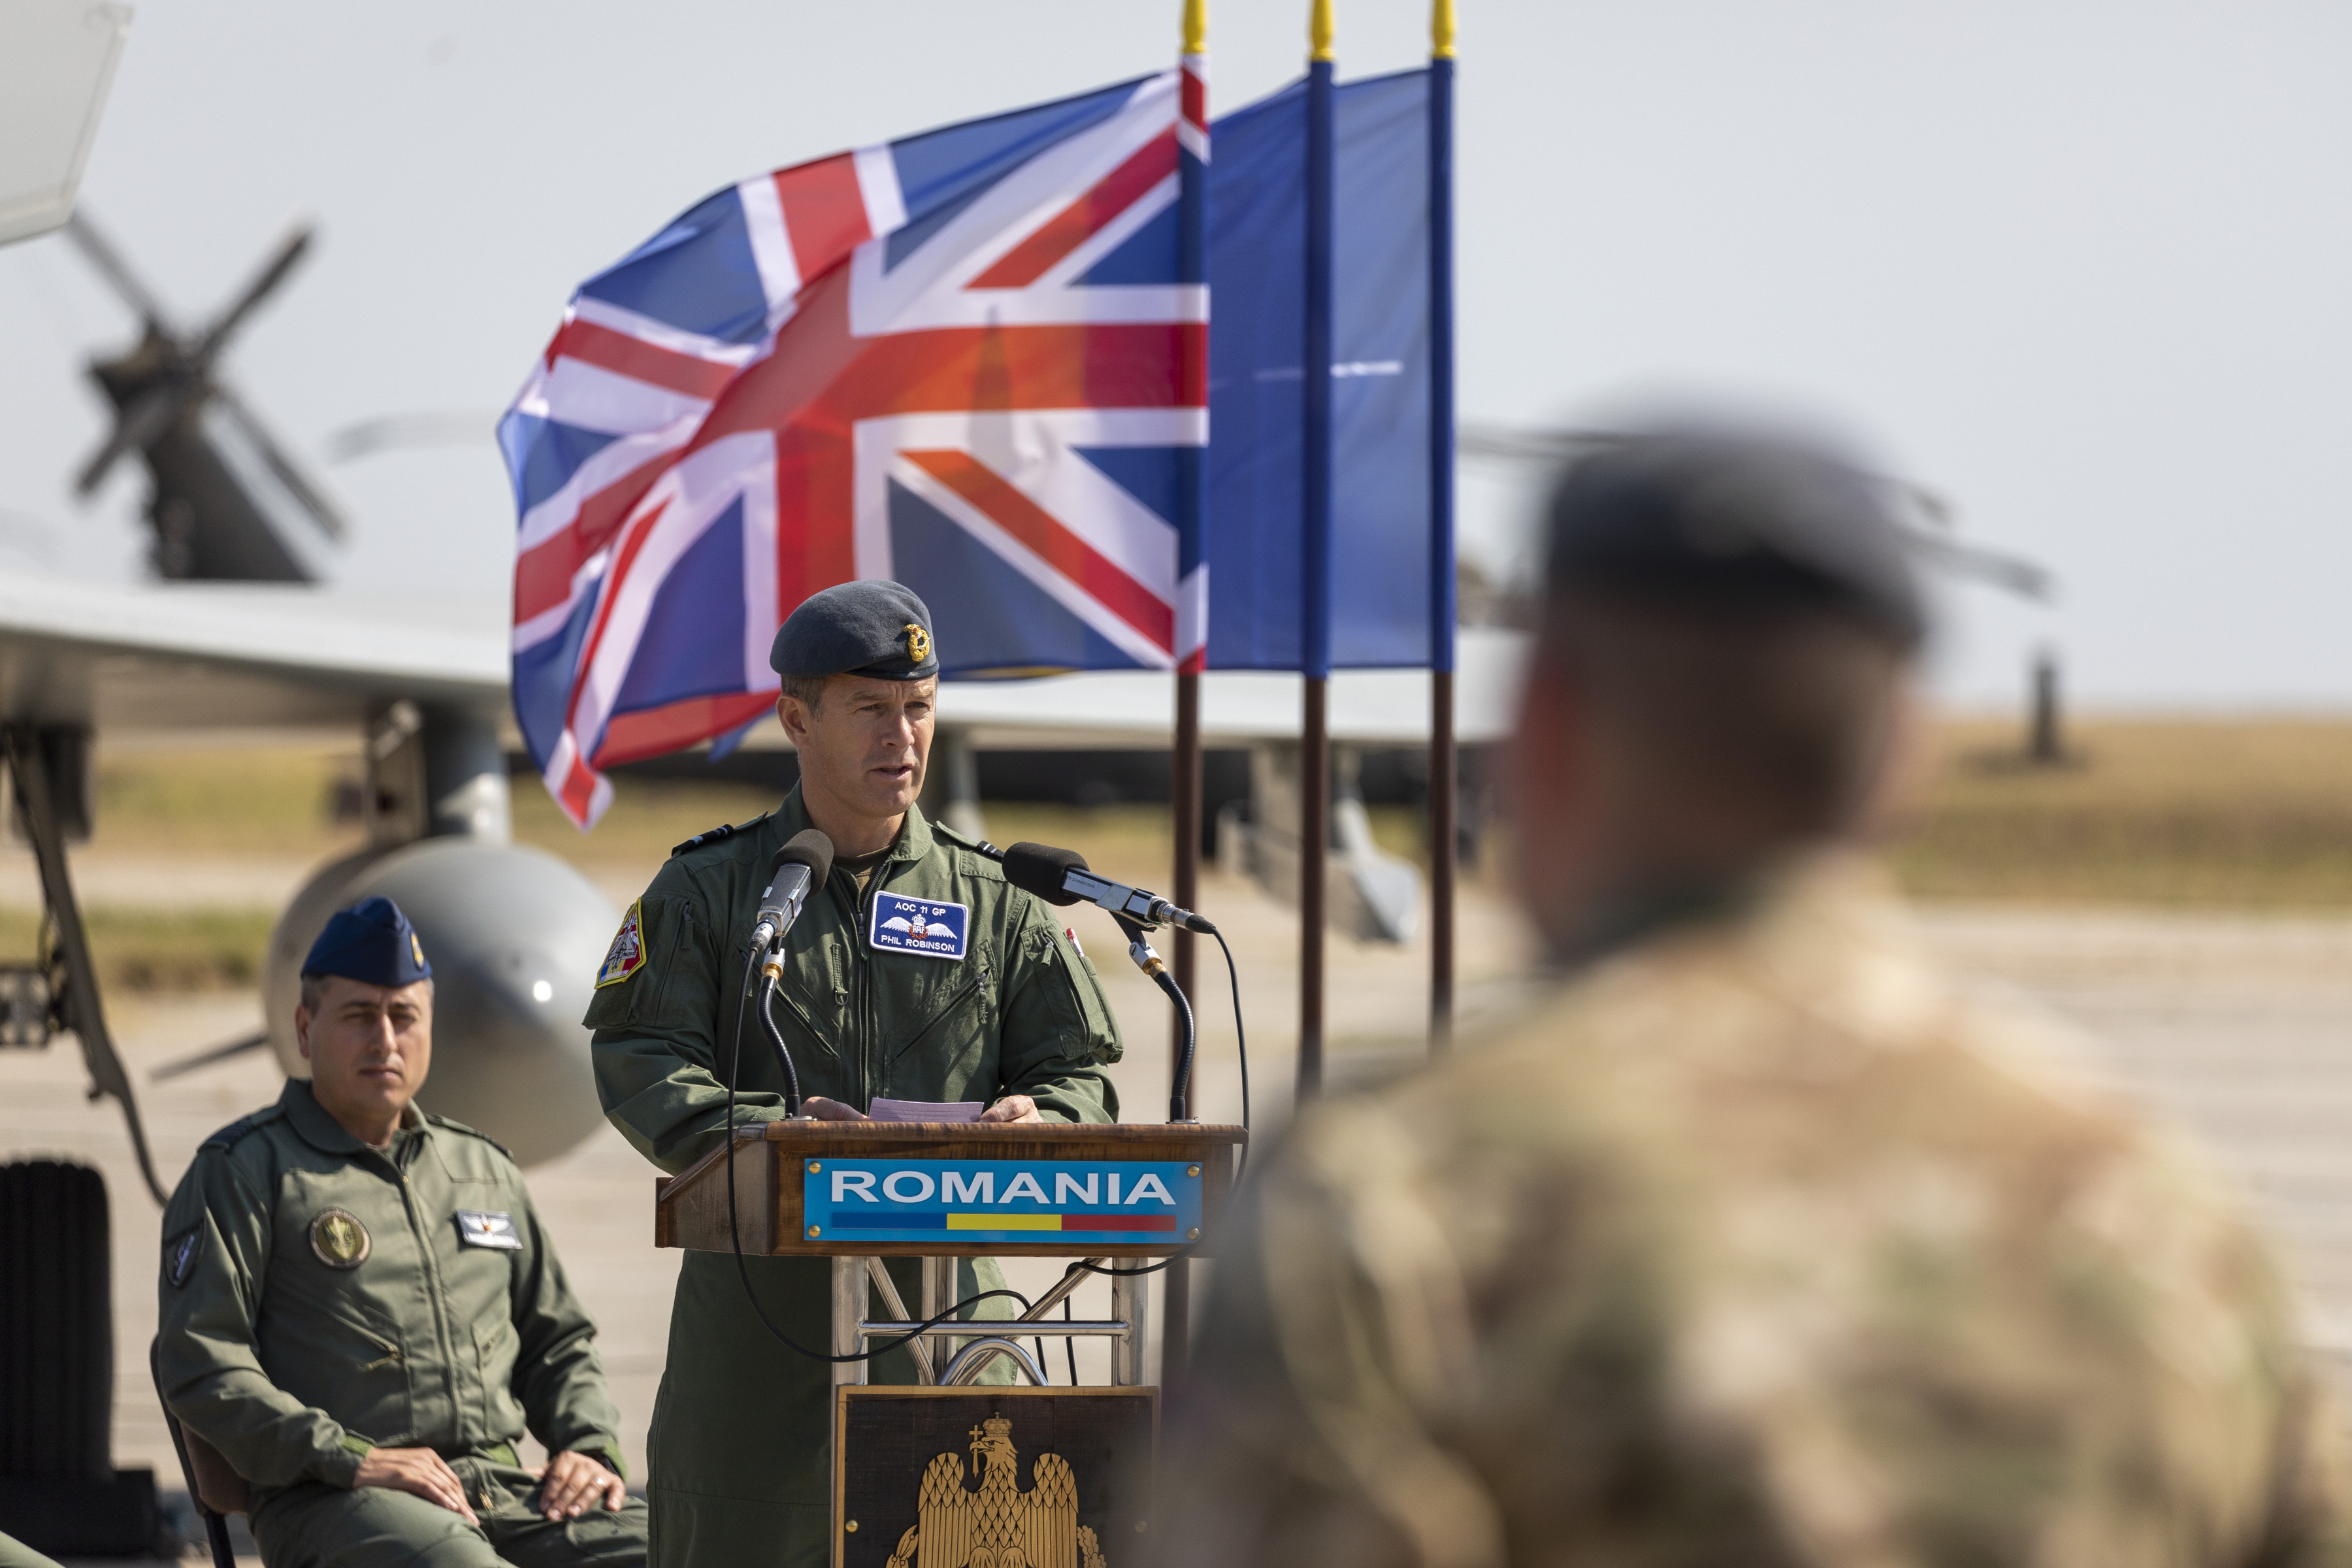 Image shows aviators giving presentation with aircraft and flags in the background.